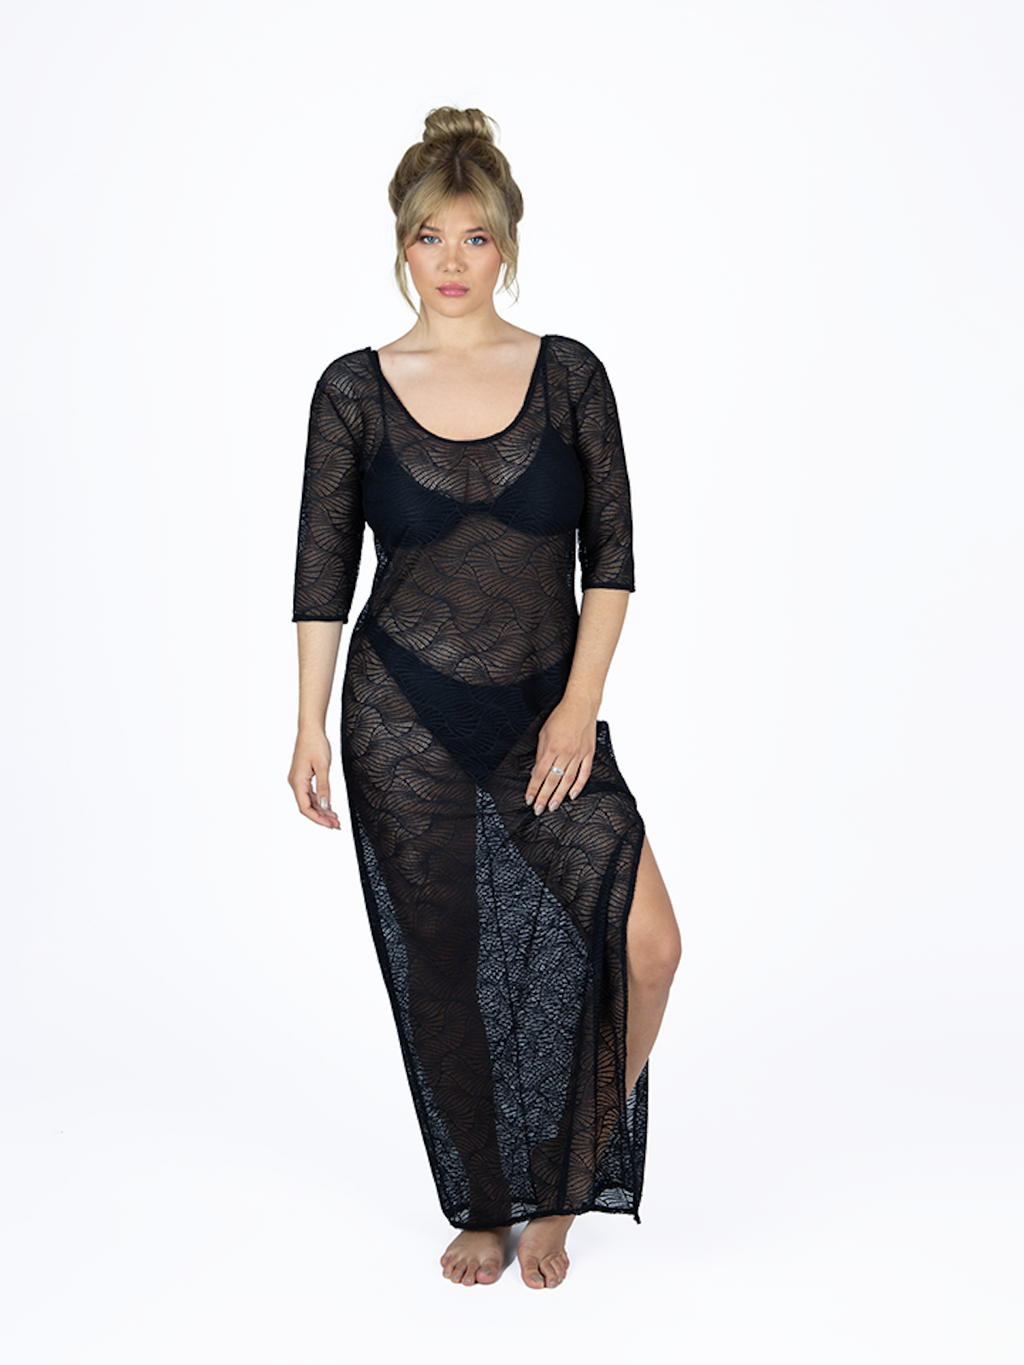 FORTALEZA LACE COVER UP